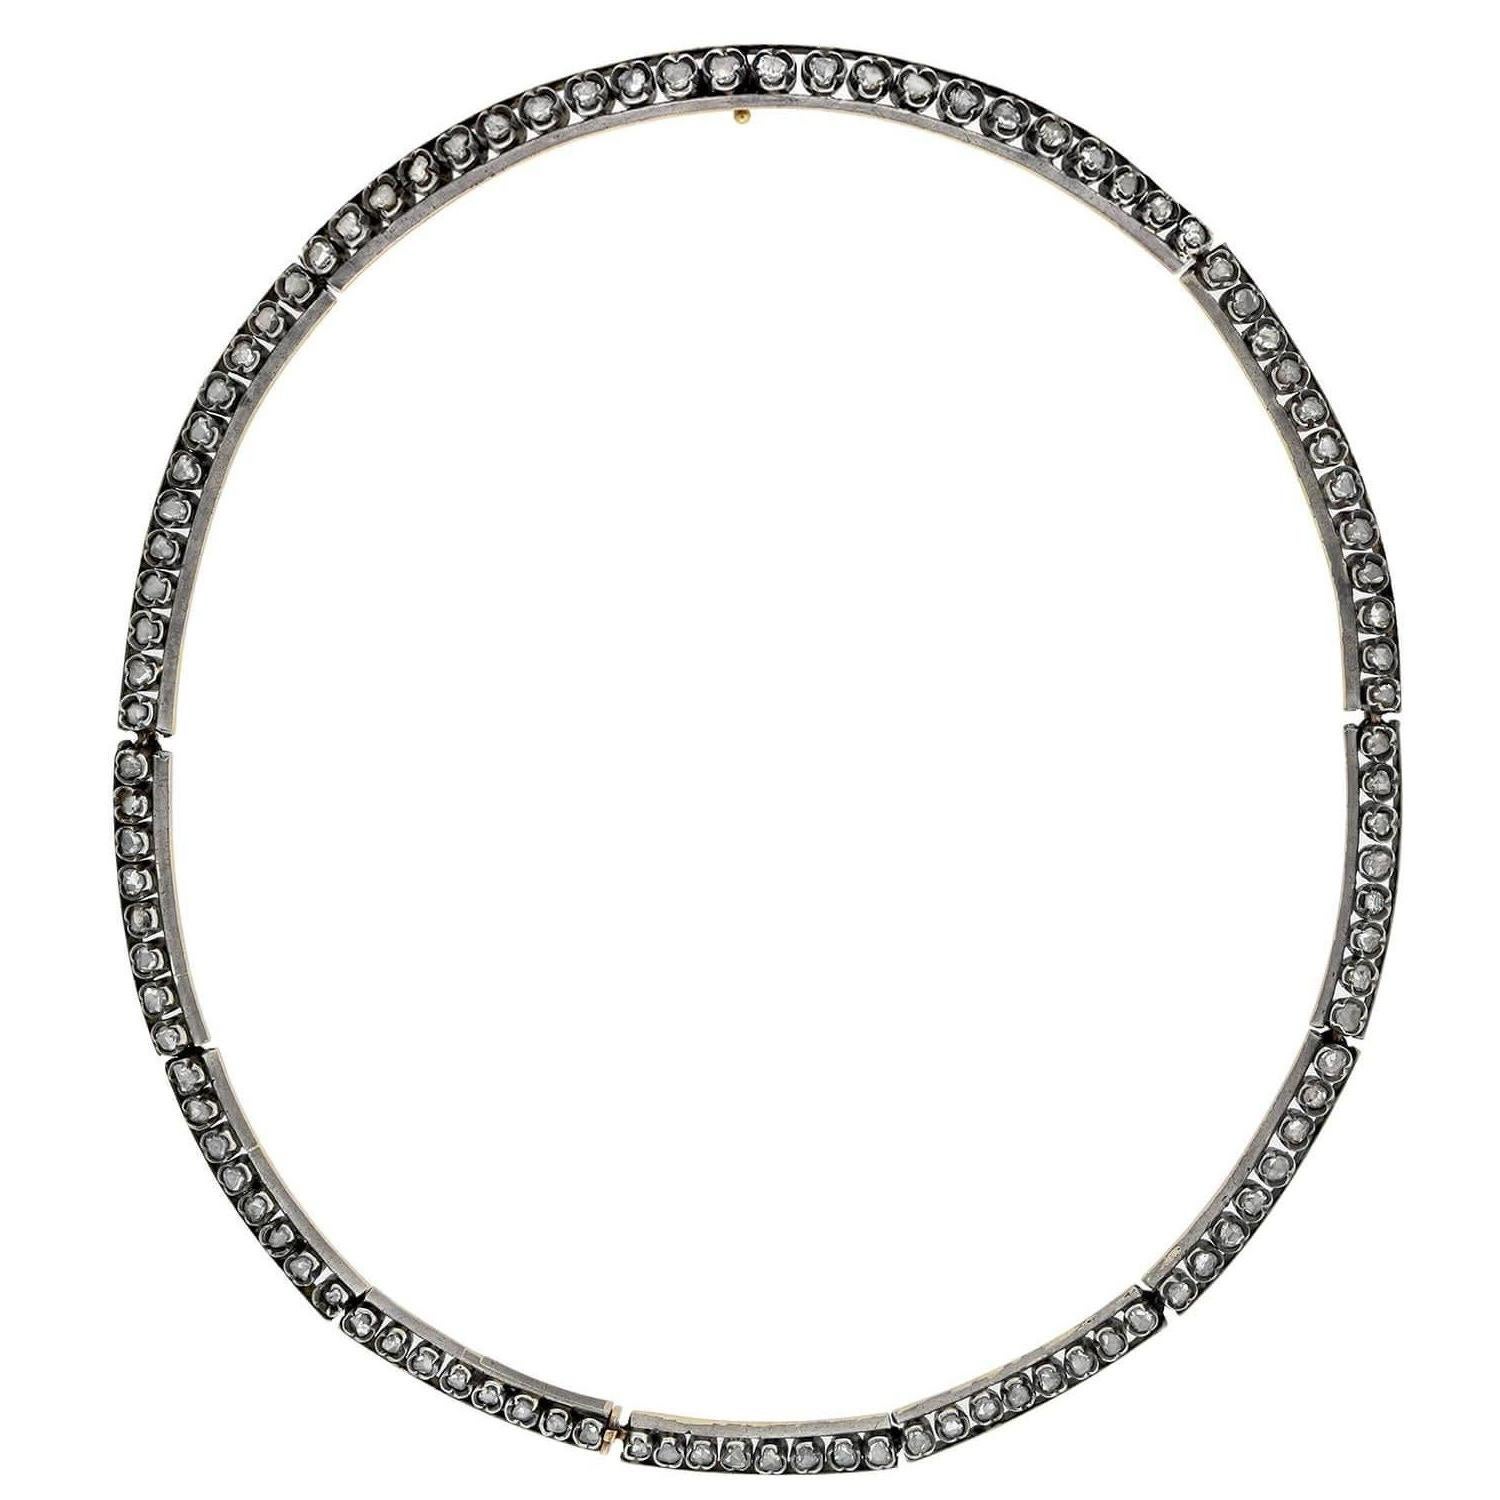 An absolutely gorgeous diamond necklace from the Victorian (ca1880) era! This stunning French-made piece is crafted in sterling-topped 18kt yellow gold and has a collar-length design. The necklace is comprised of 10 curved panel links, each formed